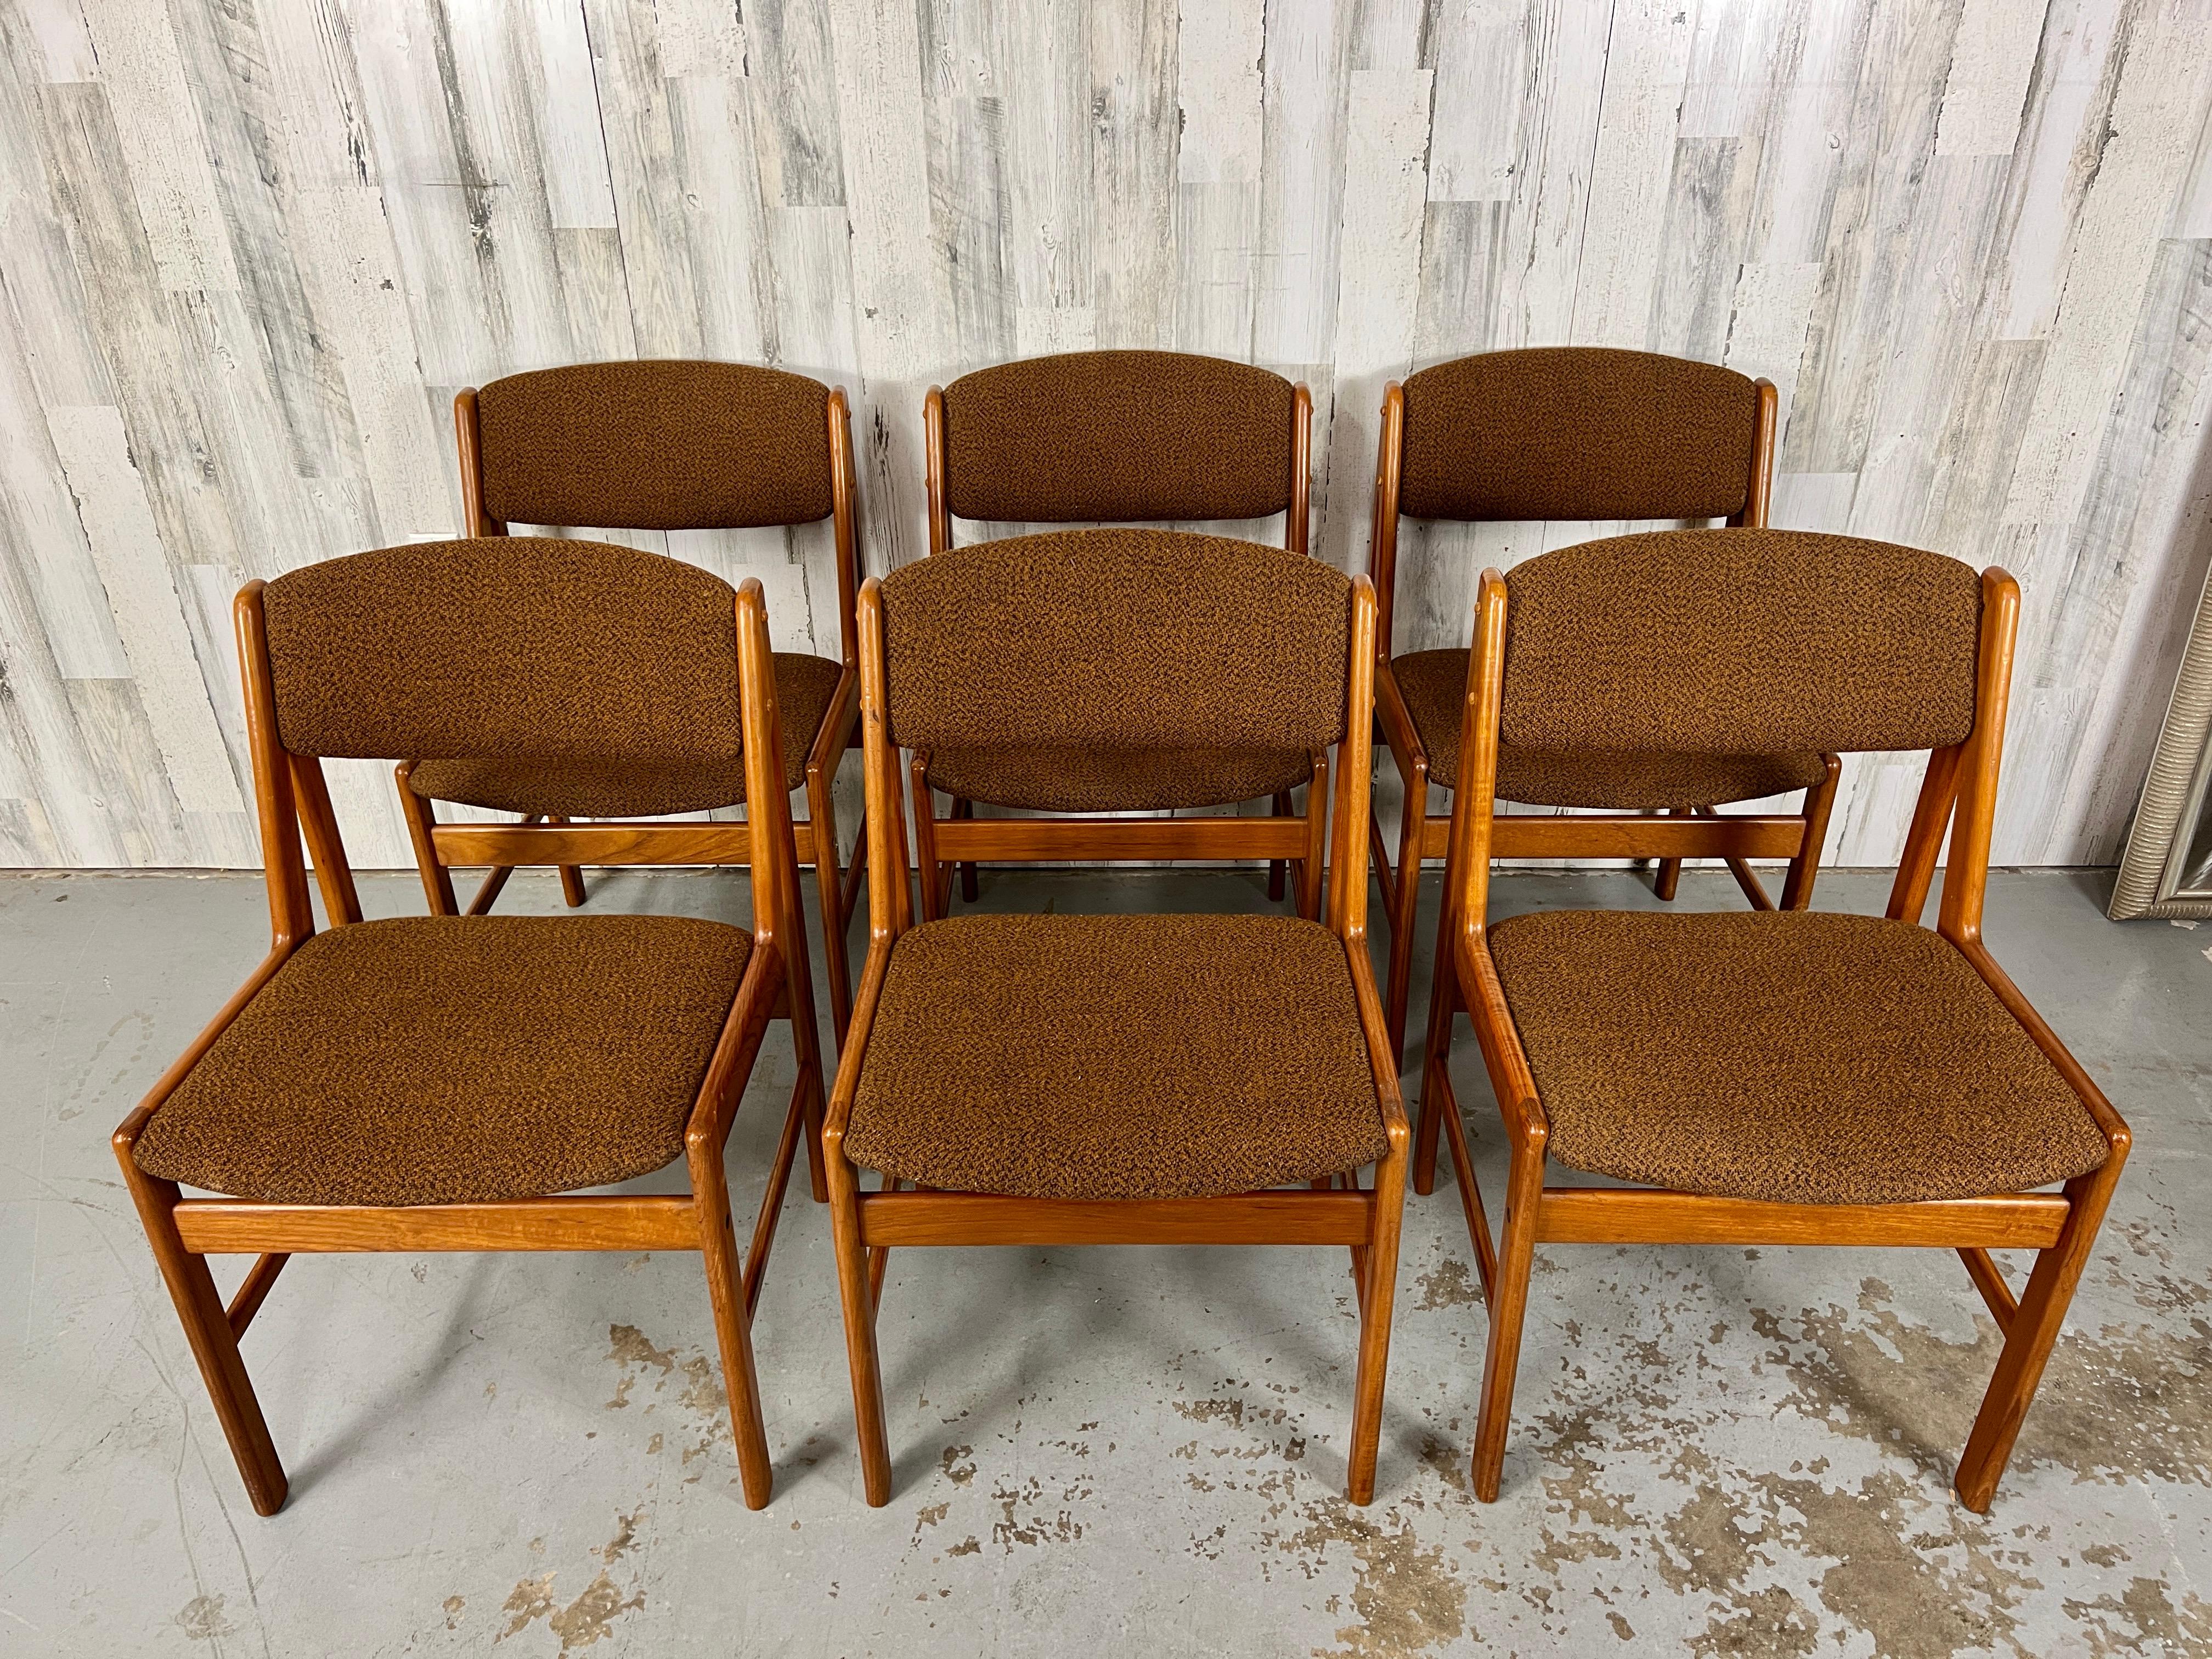 Upholstery Danish Modern Dining Chairs by Artfurn, Denmark For Sale